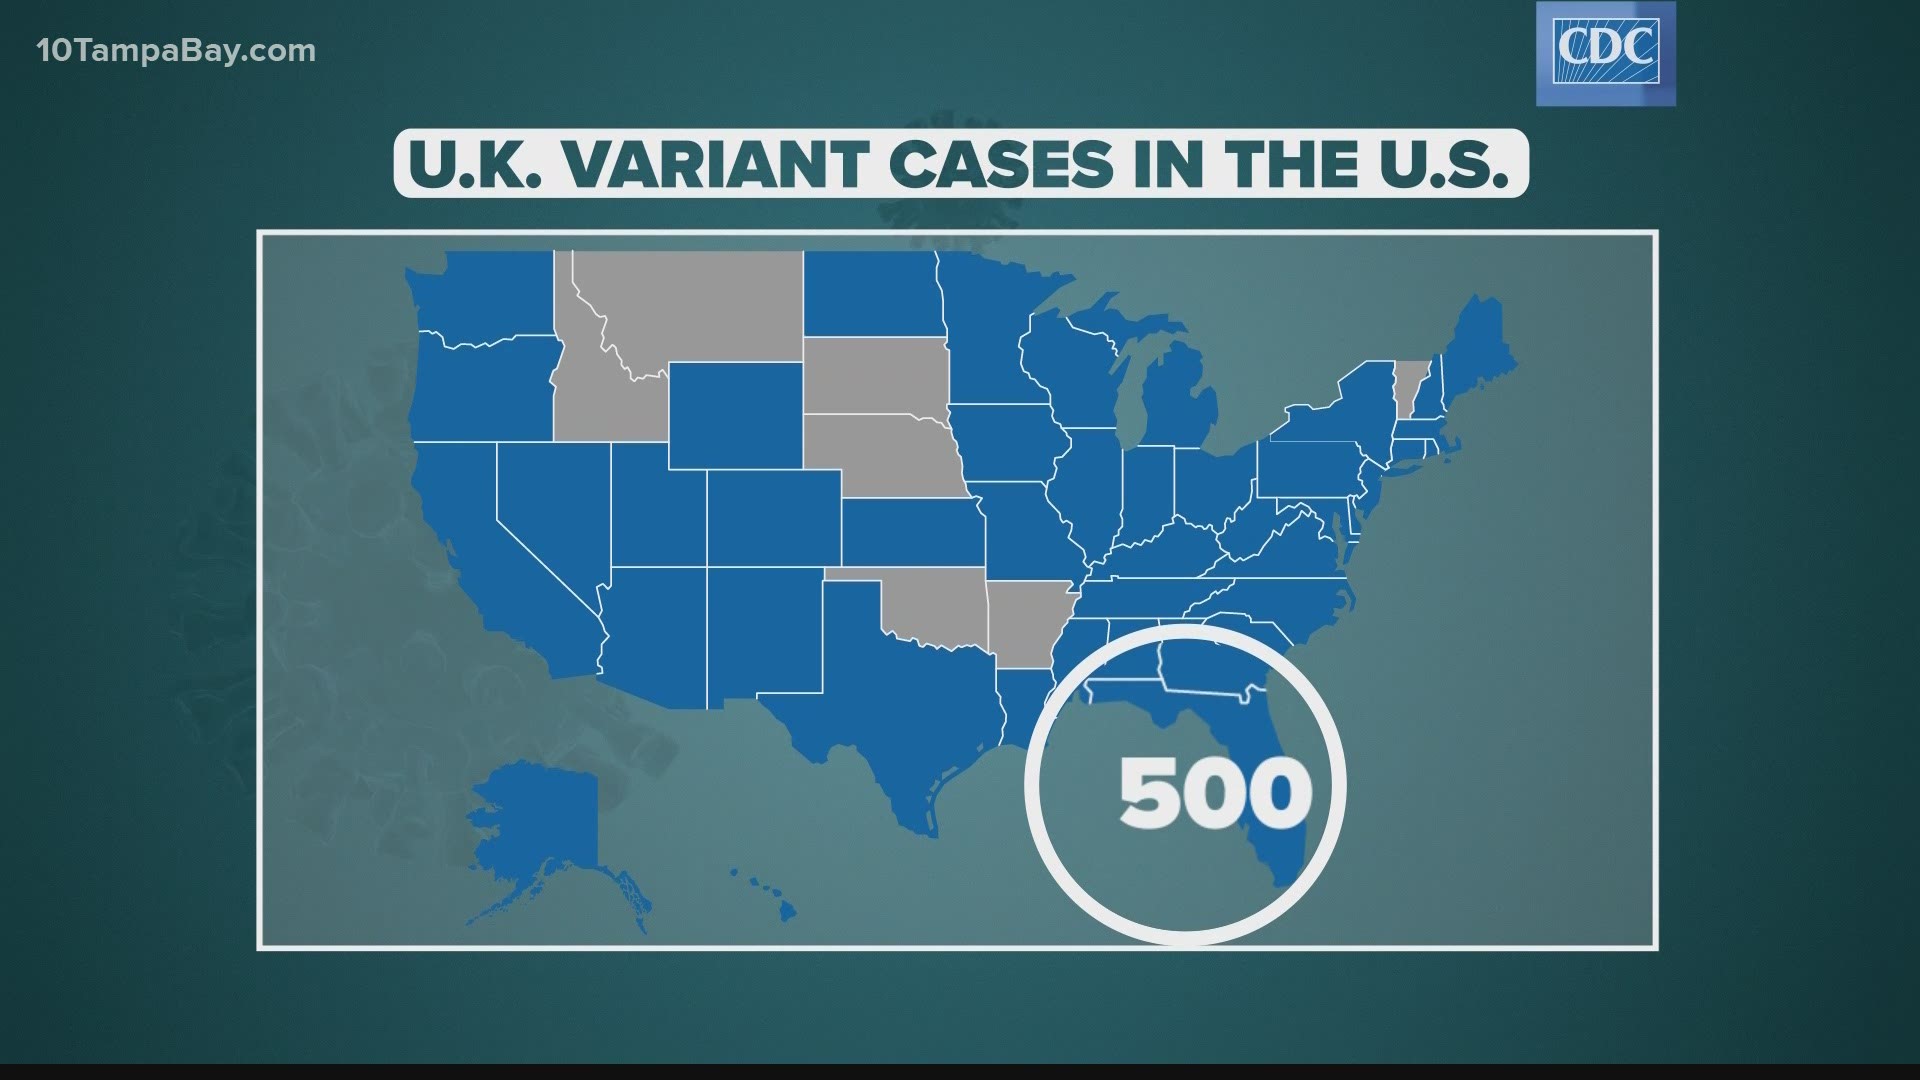 Florida continues to be the top state in the country for U.K. variant cases. The state also has one case of the variant out of Brazil.